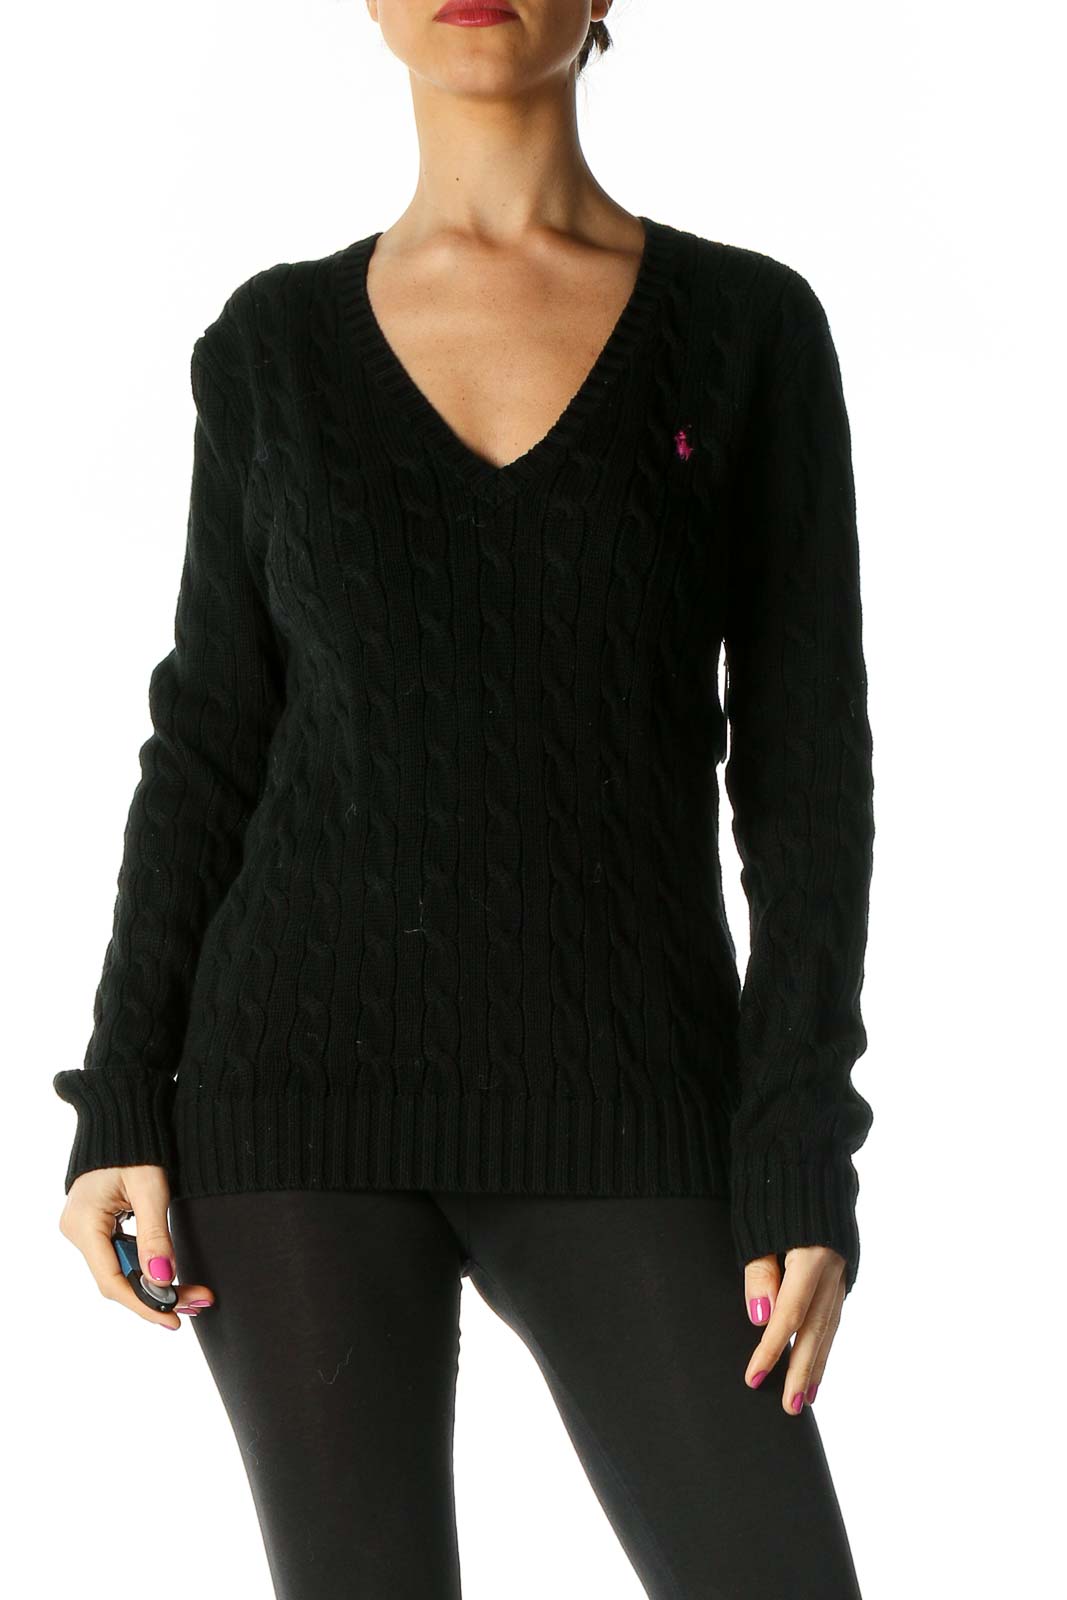 Black Solid Casual Sweater Front